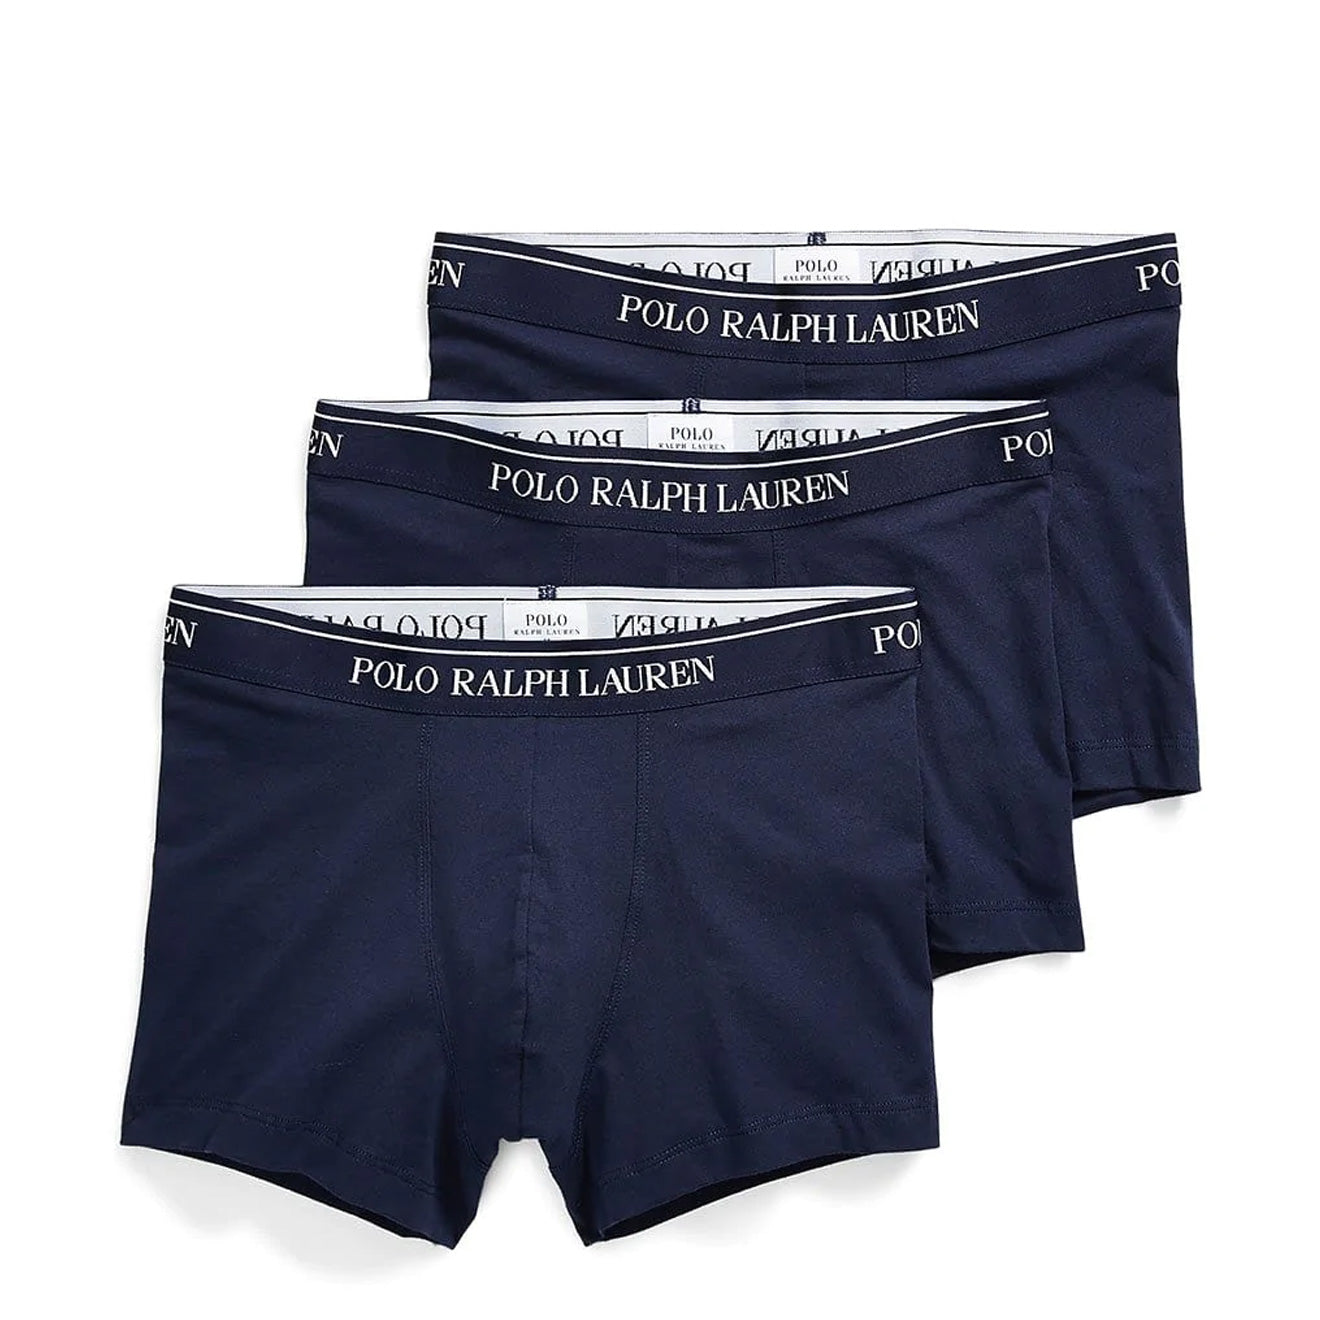 Polo Ralph Lauren Classic 3-Pack Trunks Navy | The Sporting Lodge